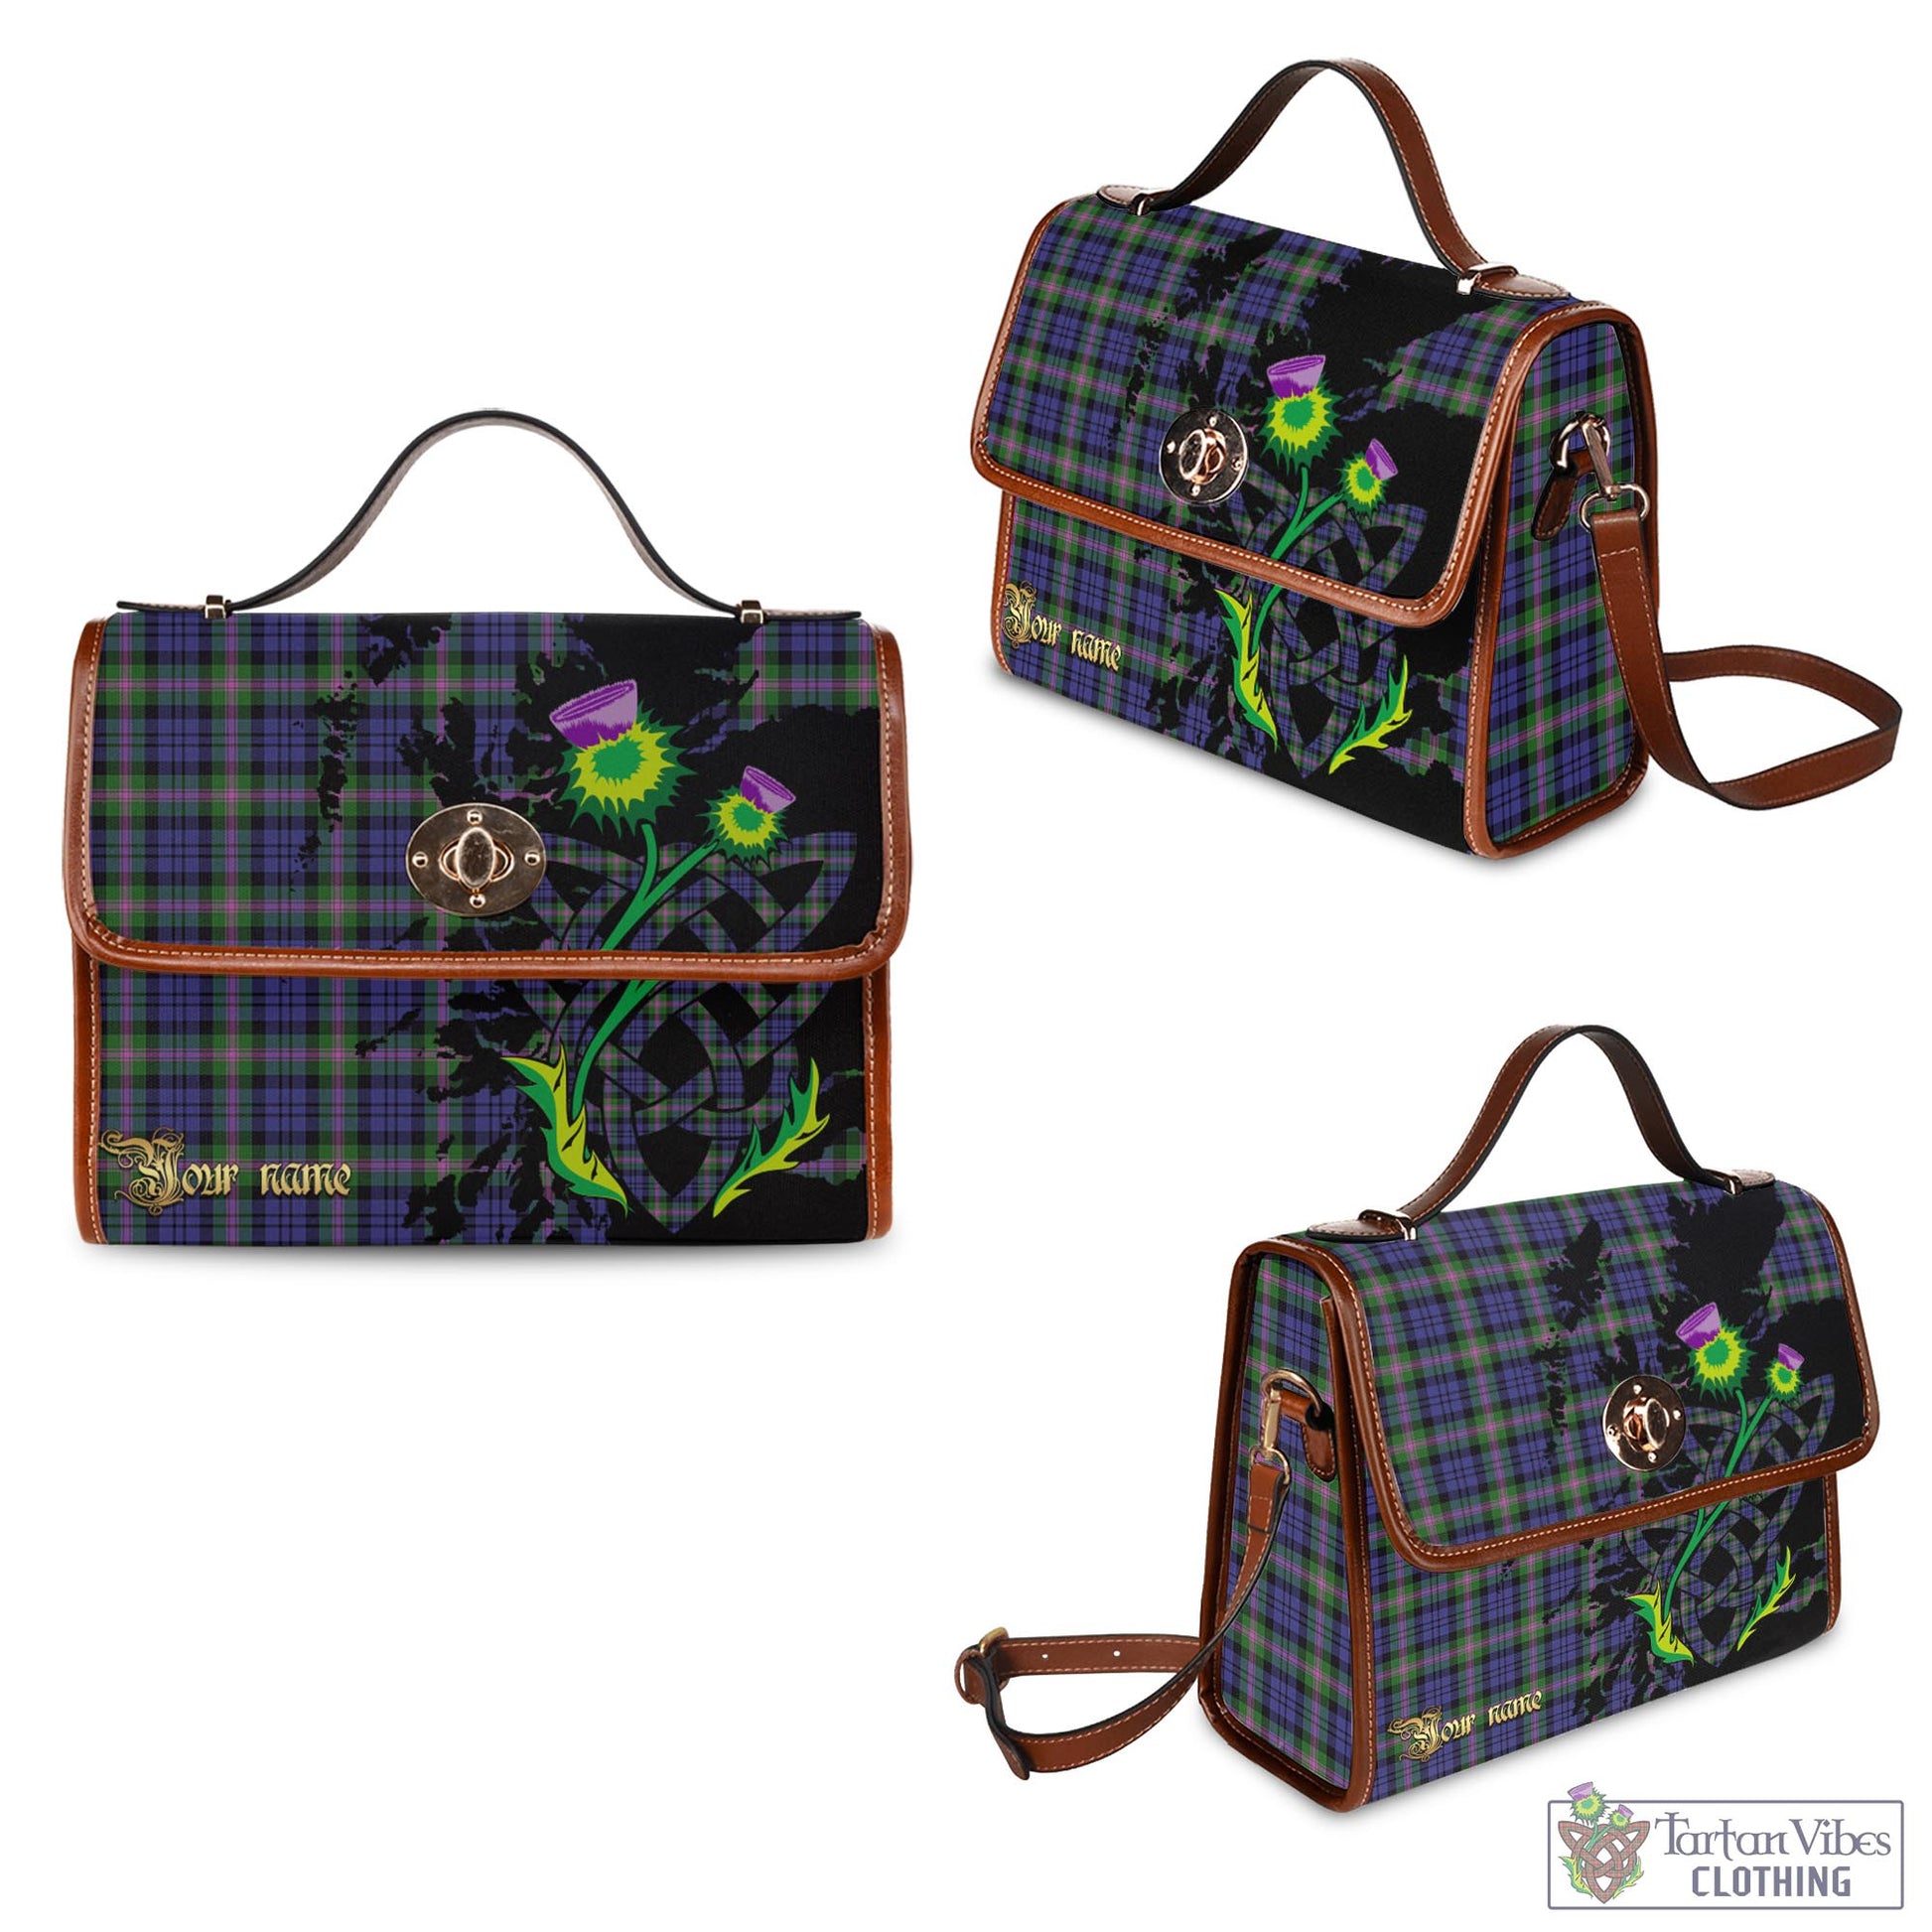 Tartan Vibes Clothing Baird Modern Tartan Waterproof Canvas Bag with Scotland Map and Thistle Celtic Accents